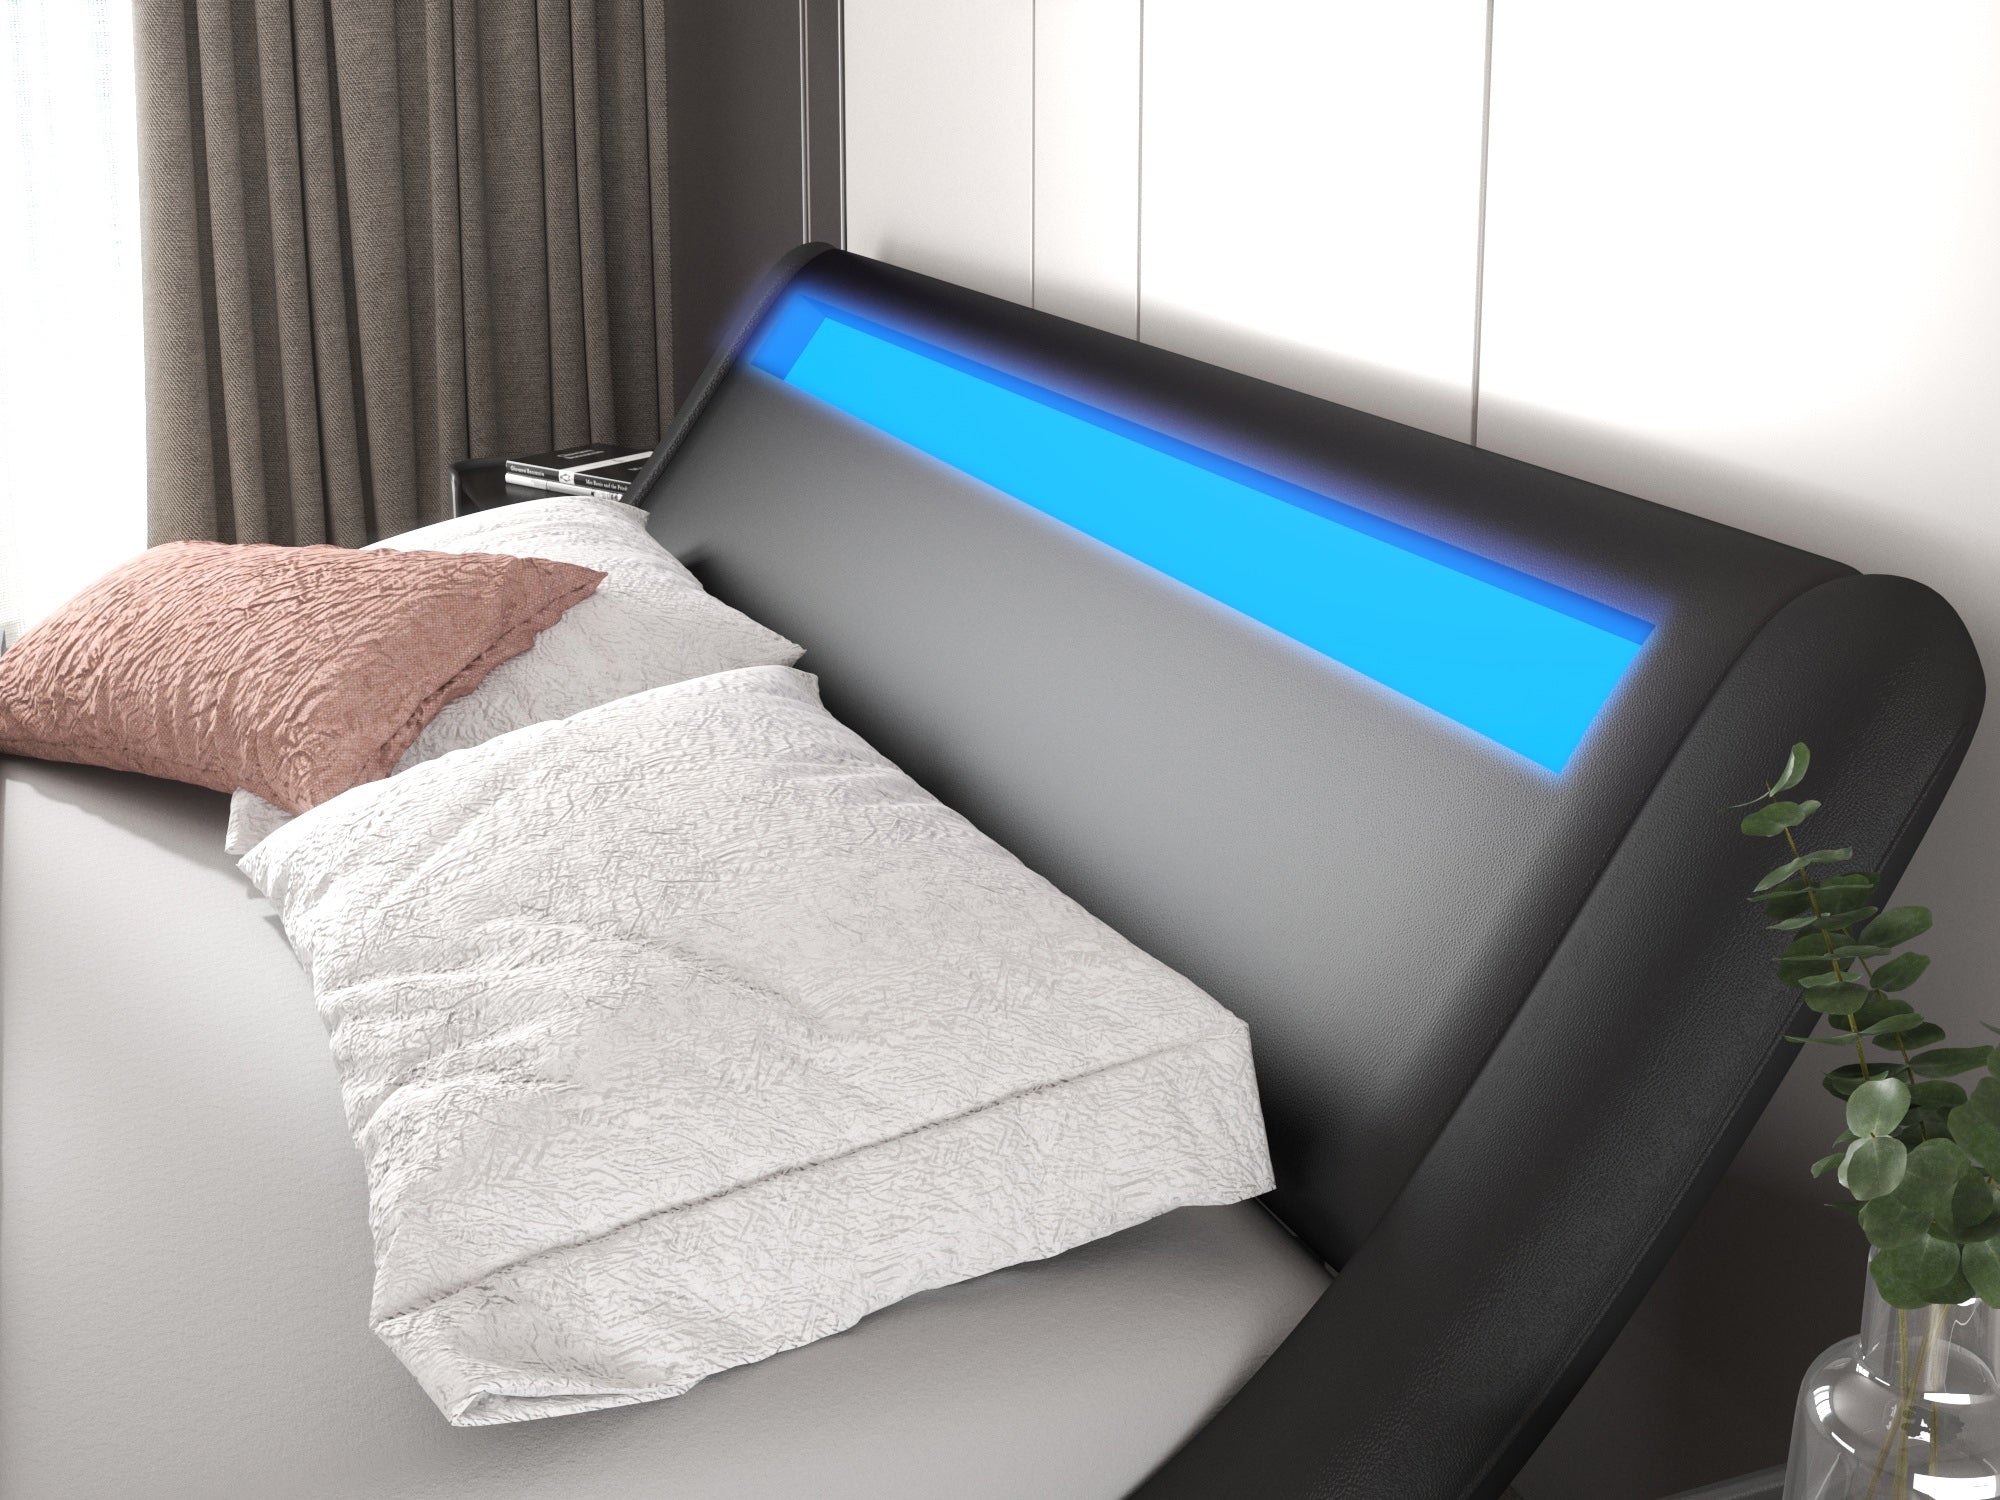 Wave Like Curve Deluxe Upholstered Modern Bed Frame with LED Headboard